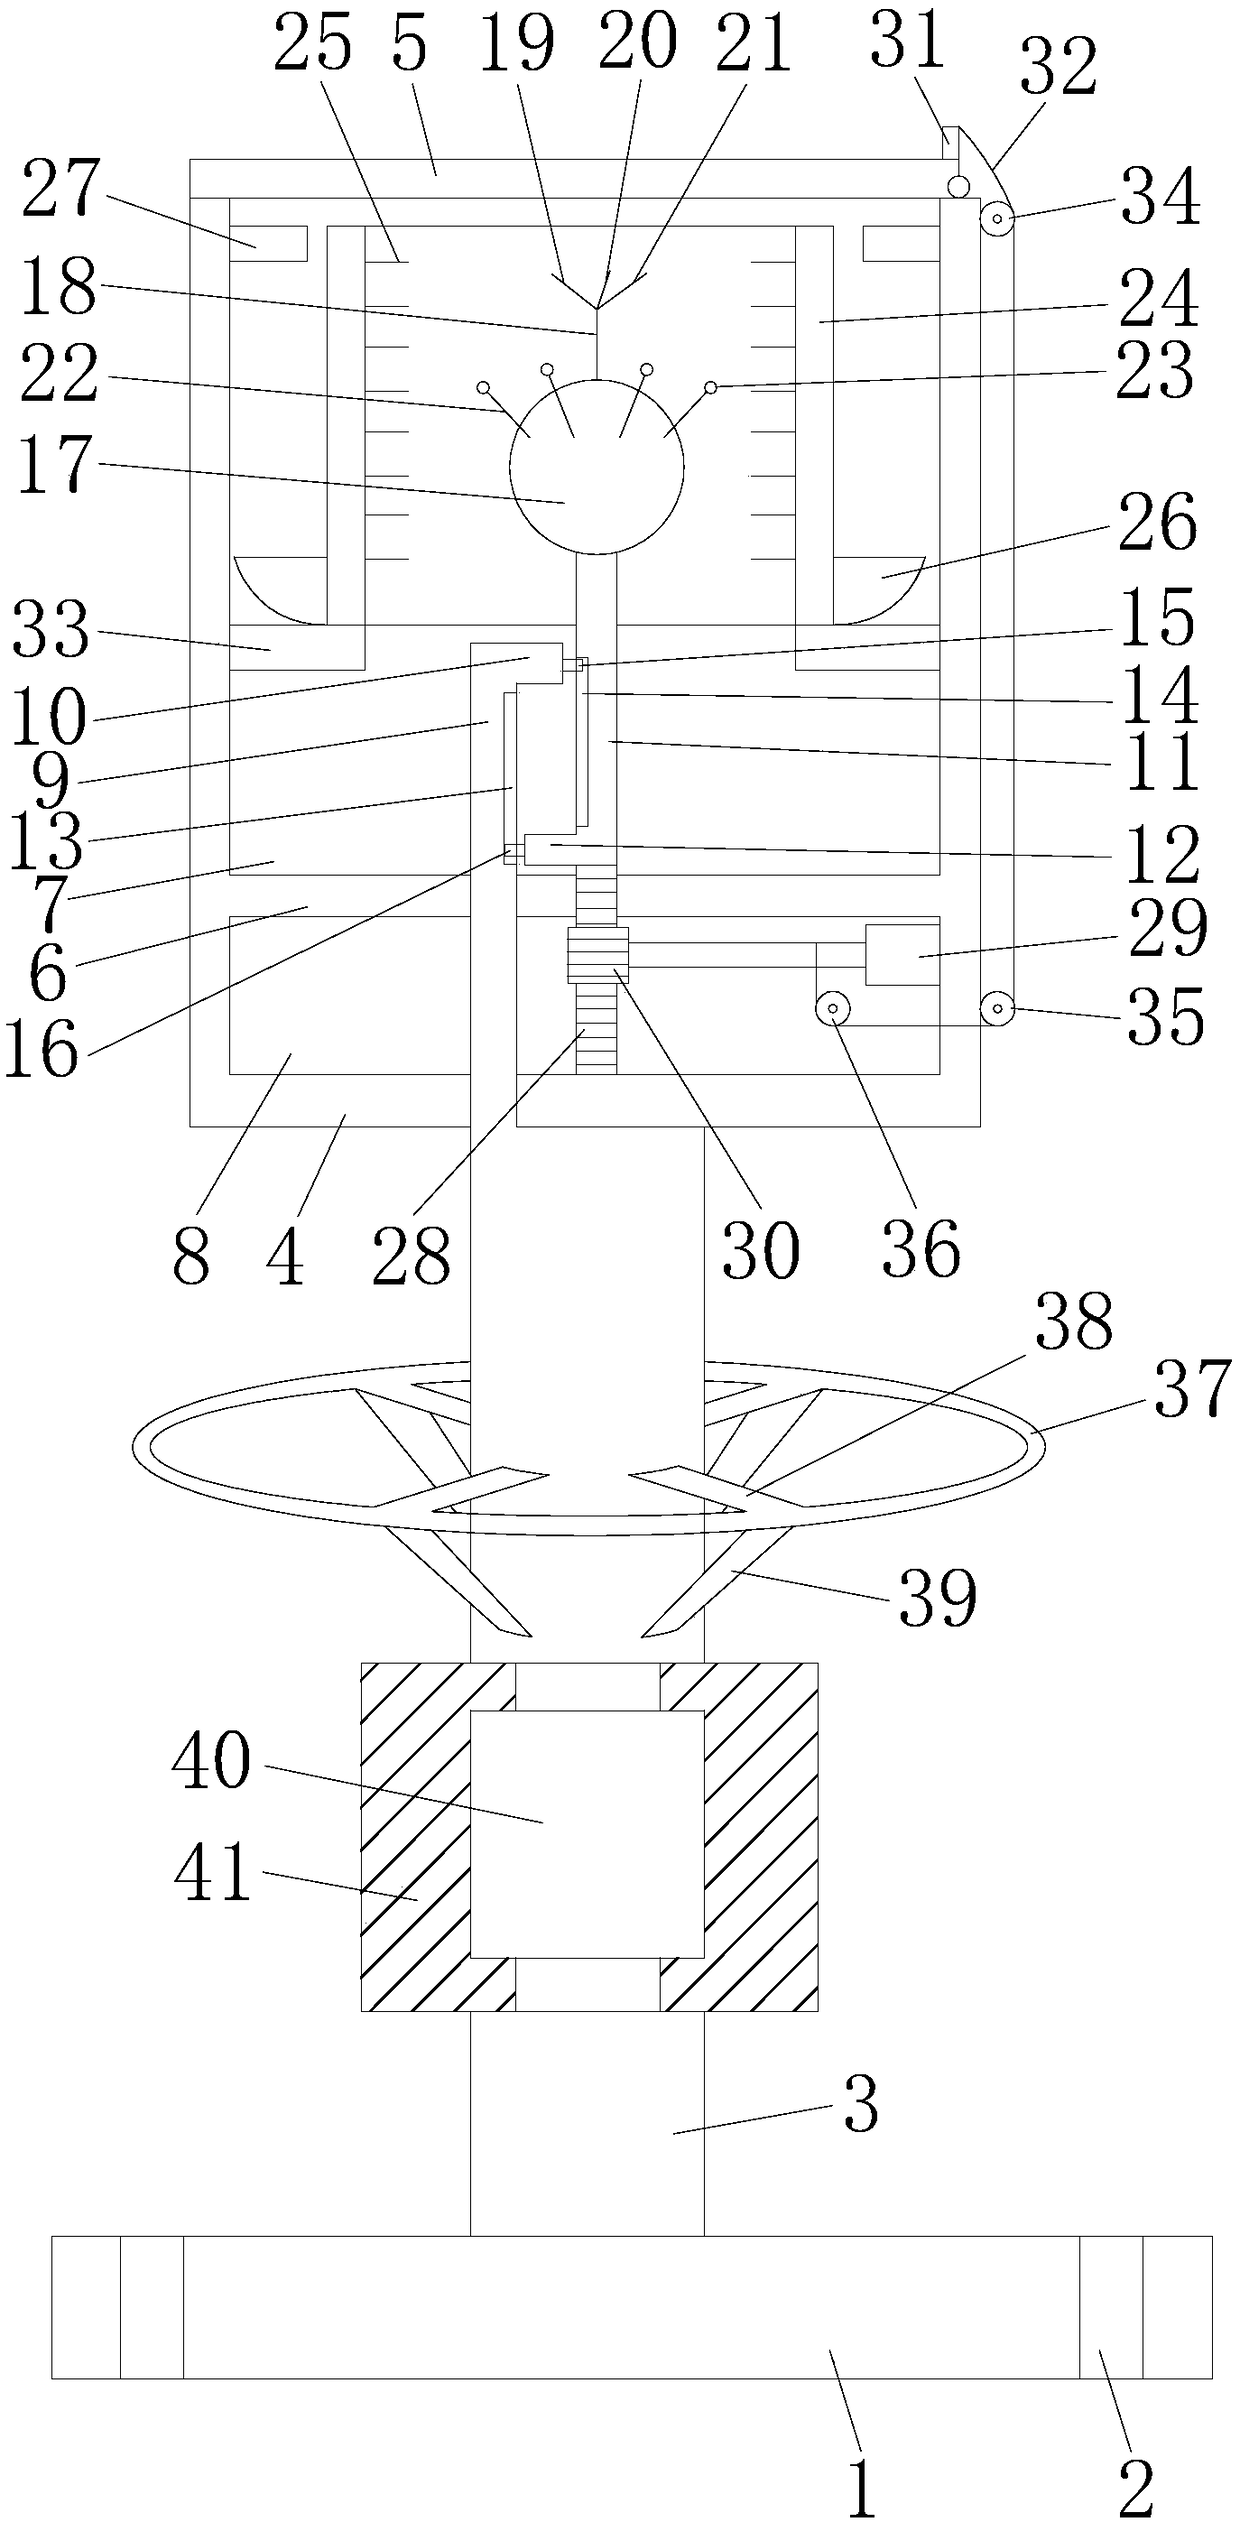 Multi-angle lightning rod capable of discharging in advance